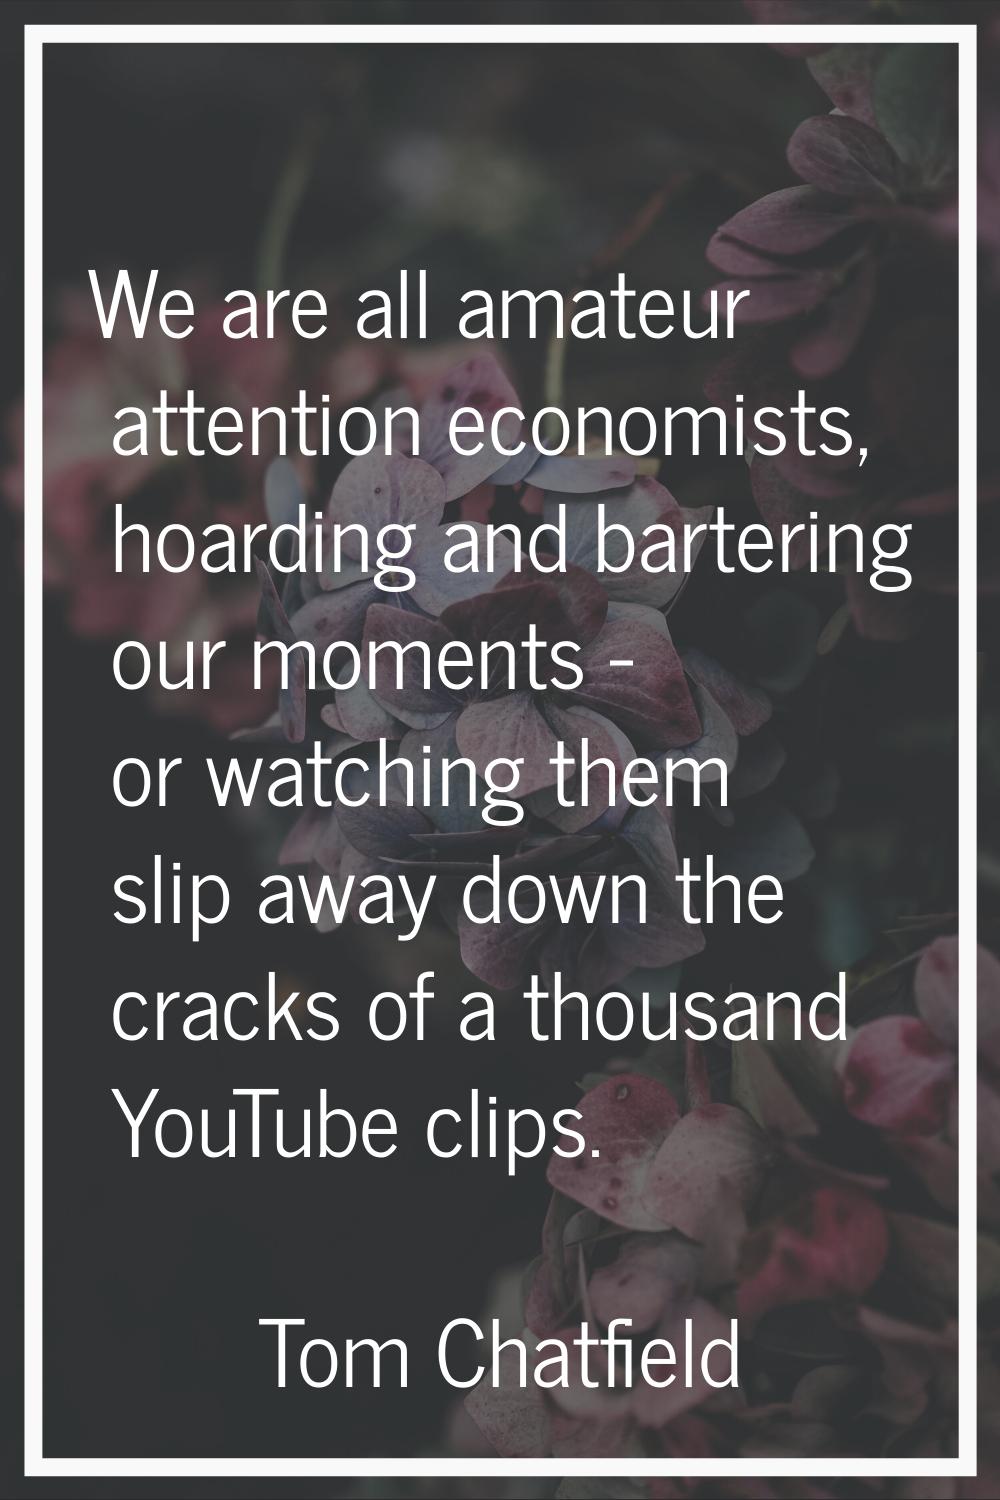 We are all amateur attention economists, hoarding and bartering our moments - or watching them slip